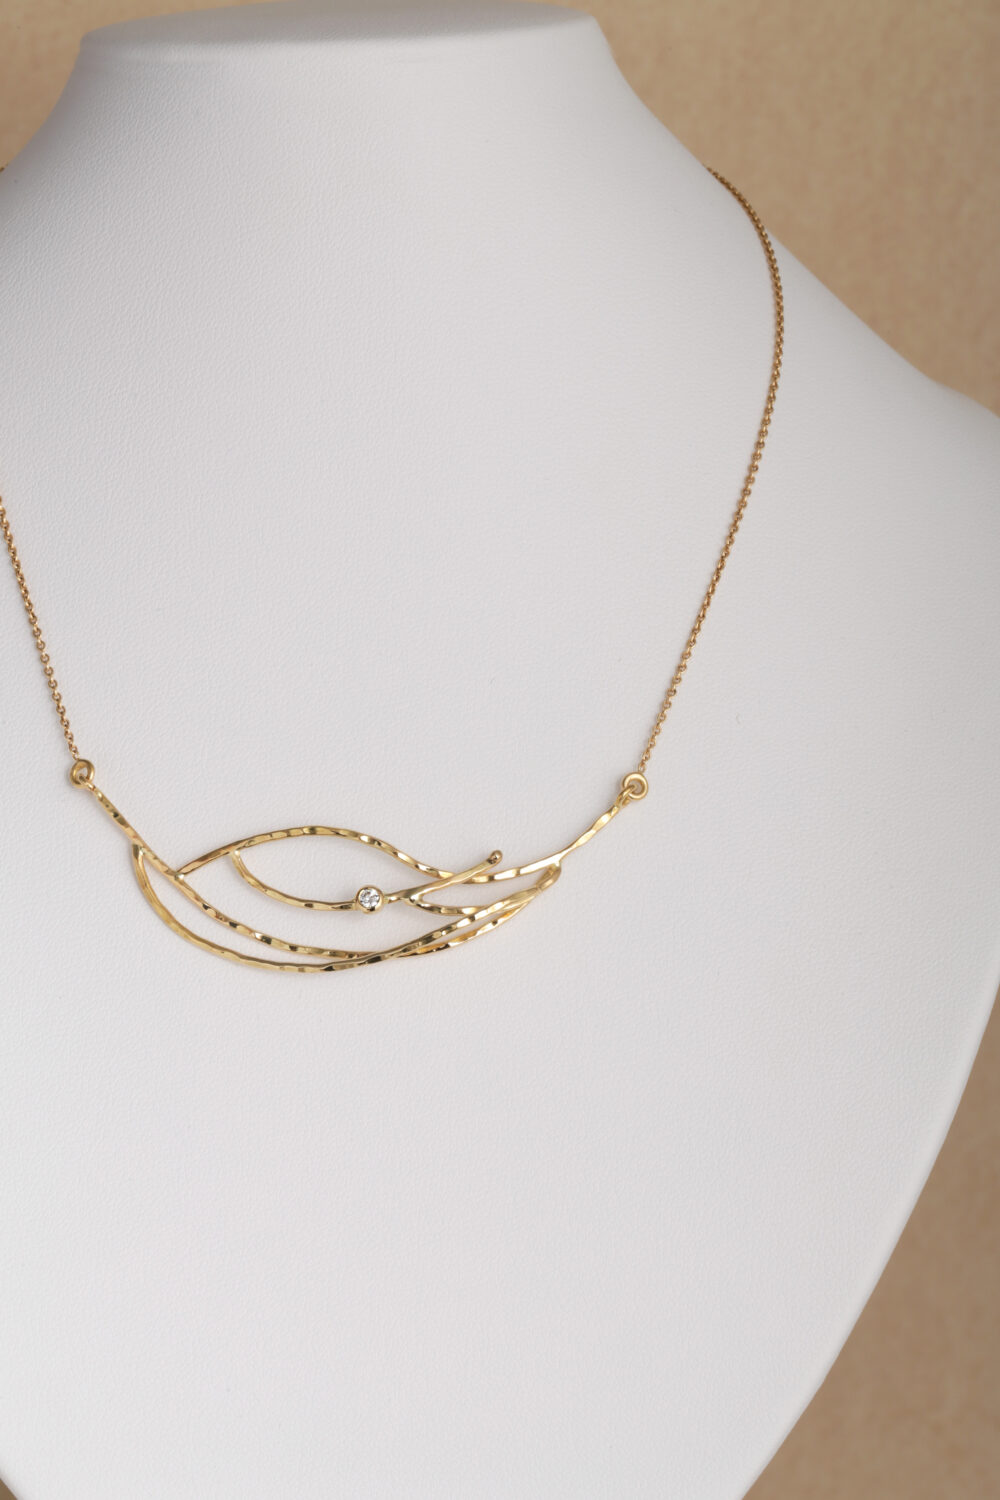 Necklace crafted from 18-karat gold set with a 0,7 ct brilliant cut diamond. All our jewellery is handmade by jewellery designer Pascale Masselis in our Antwerp based atelier.